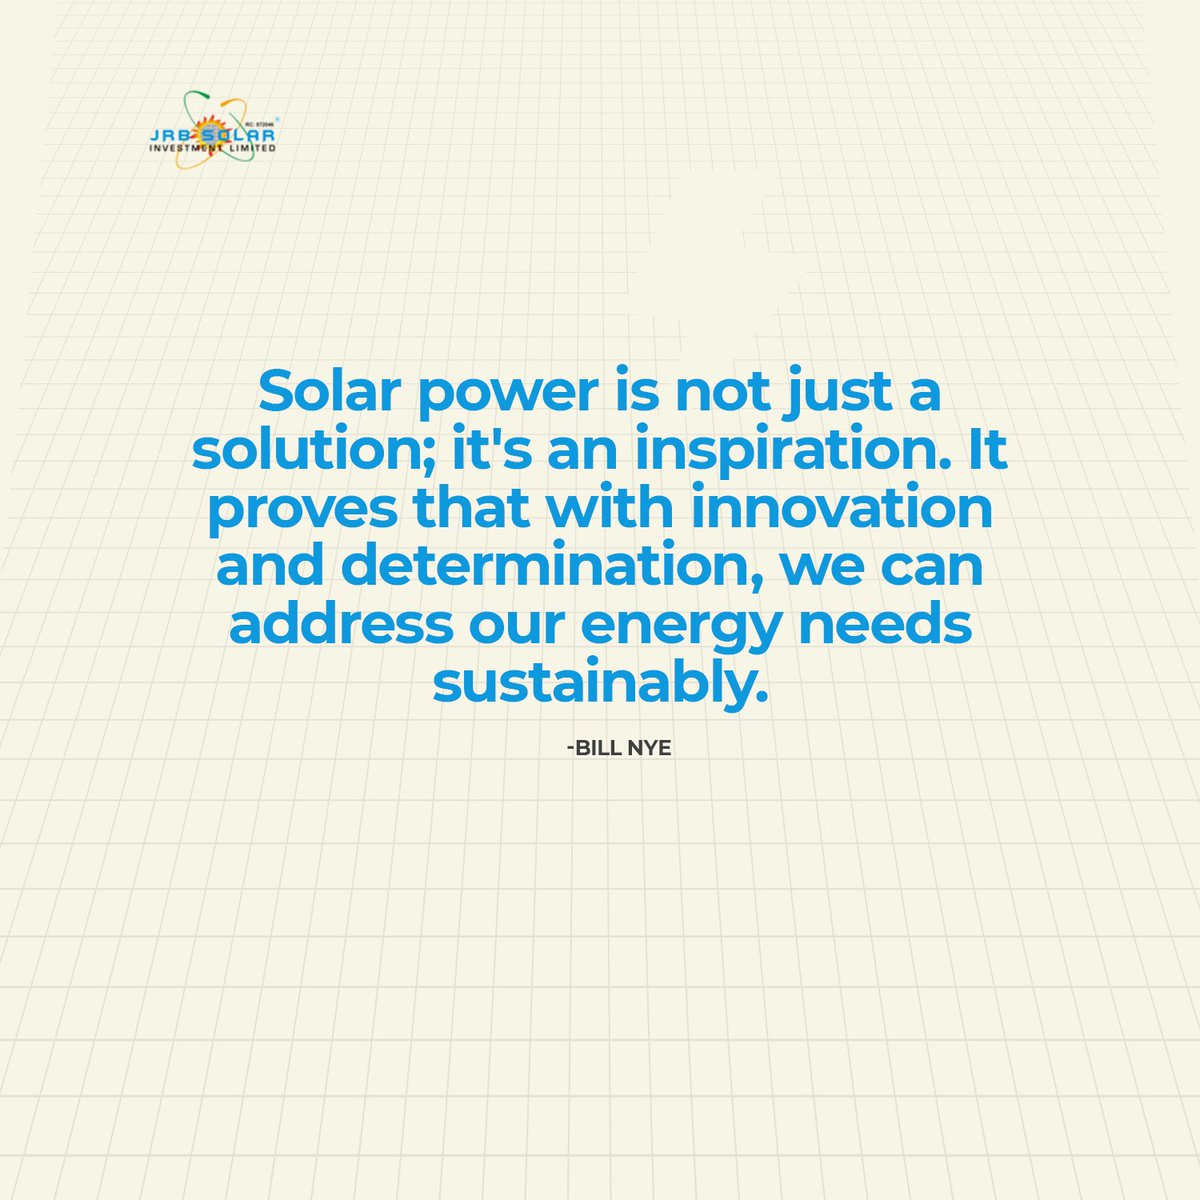 Solar power is not just a solution; it's an inspiration. 
It proves that with innovation and determination, we can address our energy needs sustainably. 
- Bill Nye

Agree?

Let us know in the comments

#solar #uninterruptedenergy #renewableenergy  #powersolution #solarsolutions